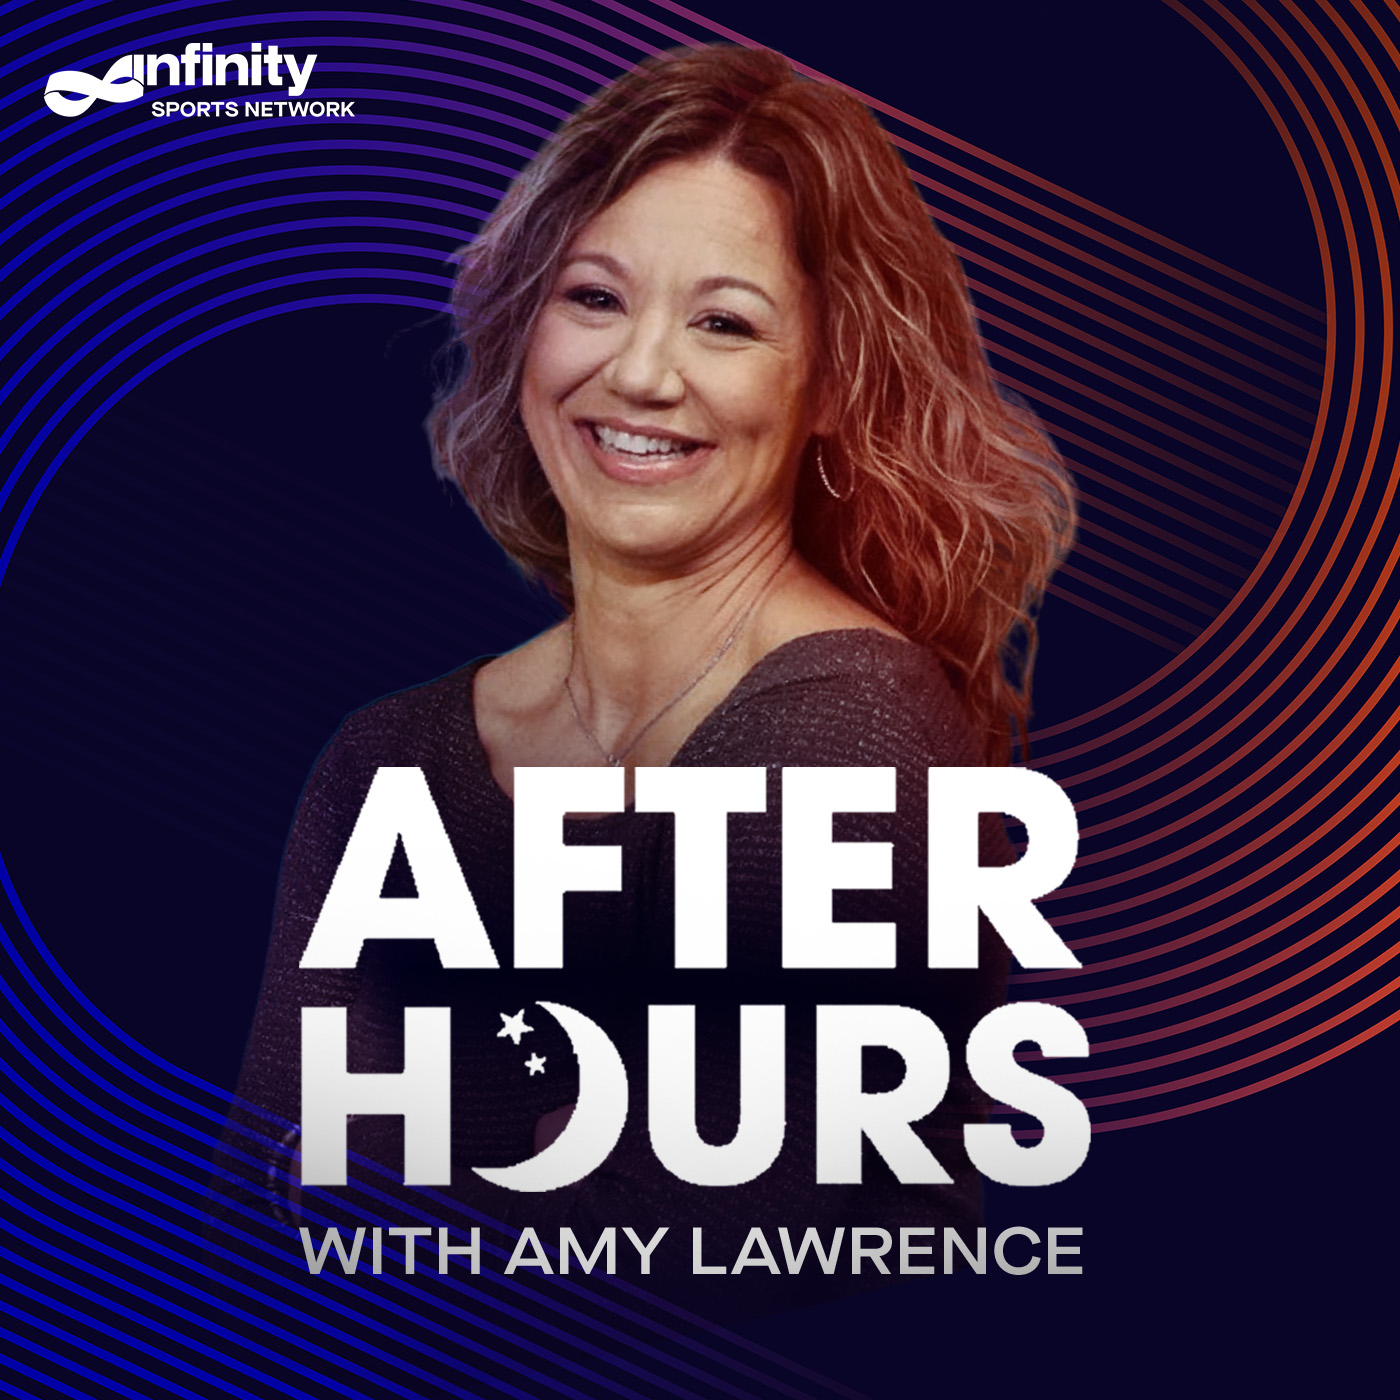 2-14-22 After Hours with Amy Lawrence PODCAST: Hour 2